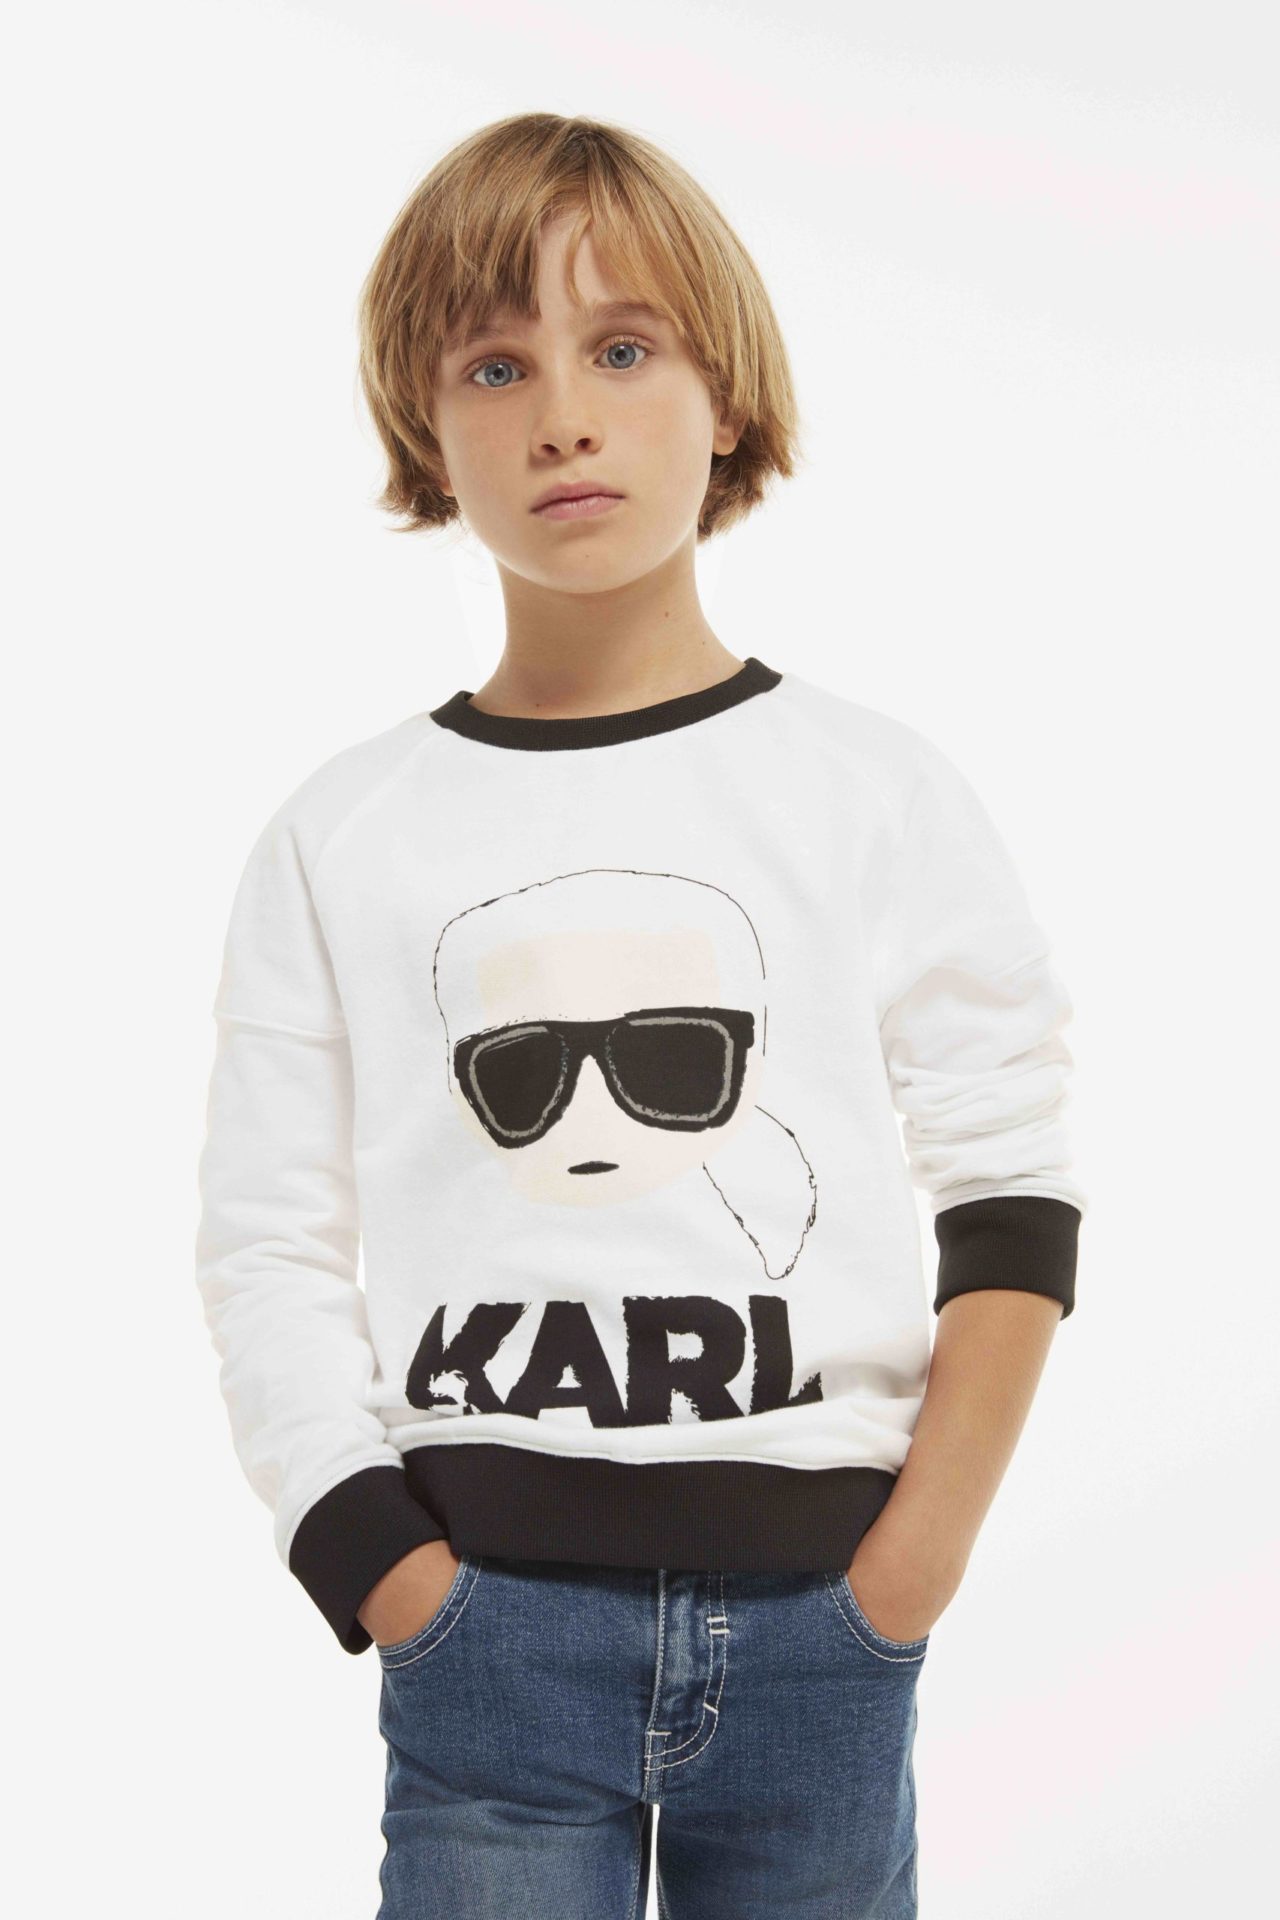 The Karl Lagerfeld kids collection features the signature silhouette of the incredible designer